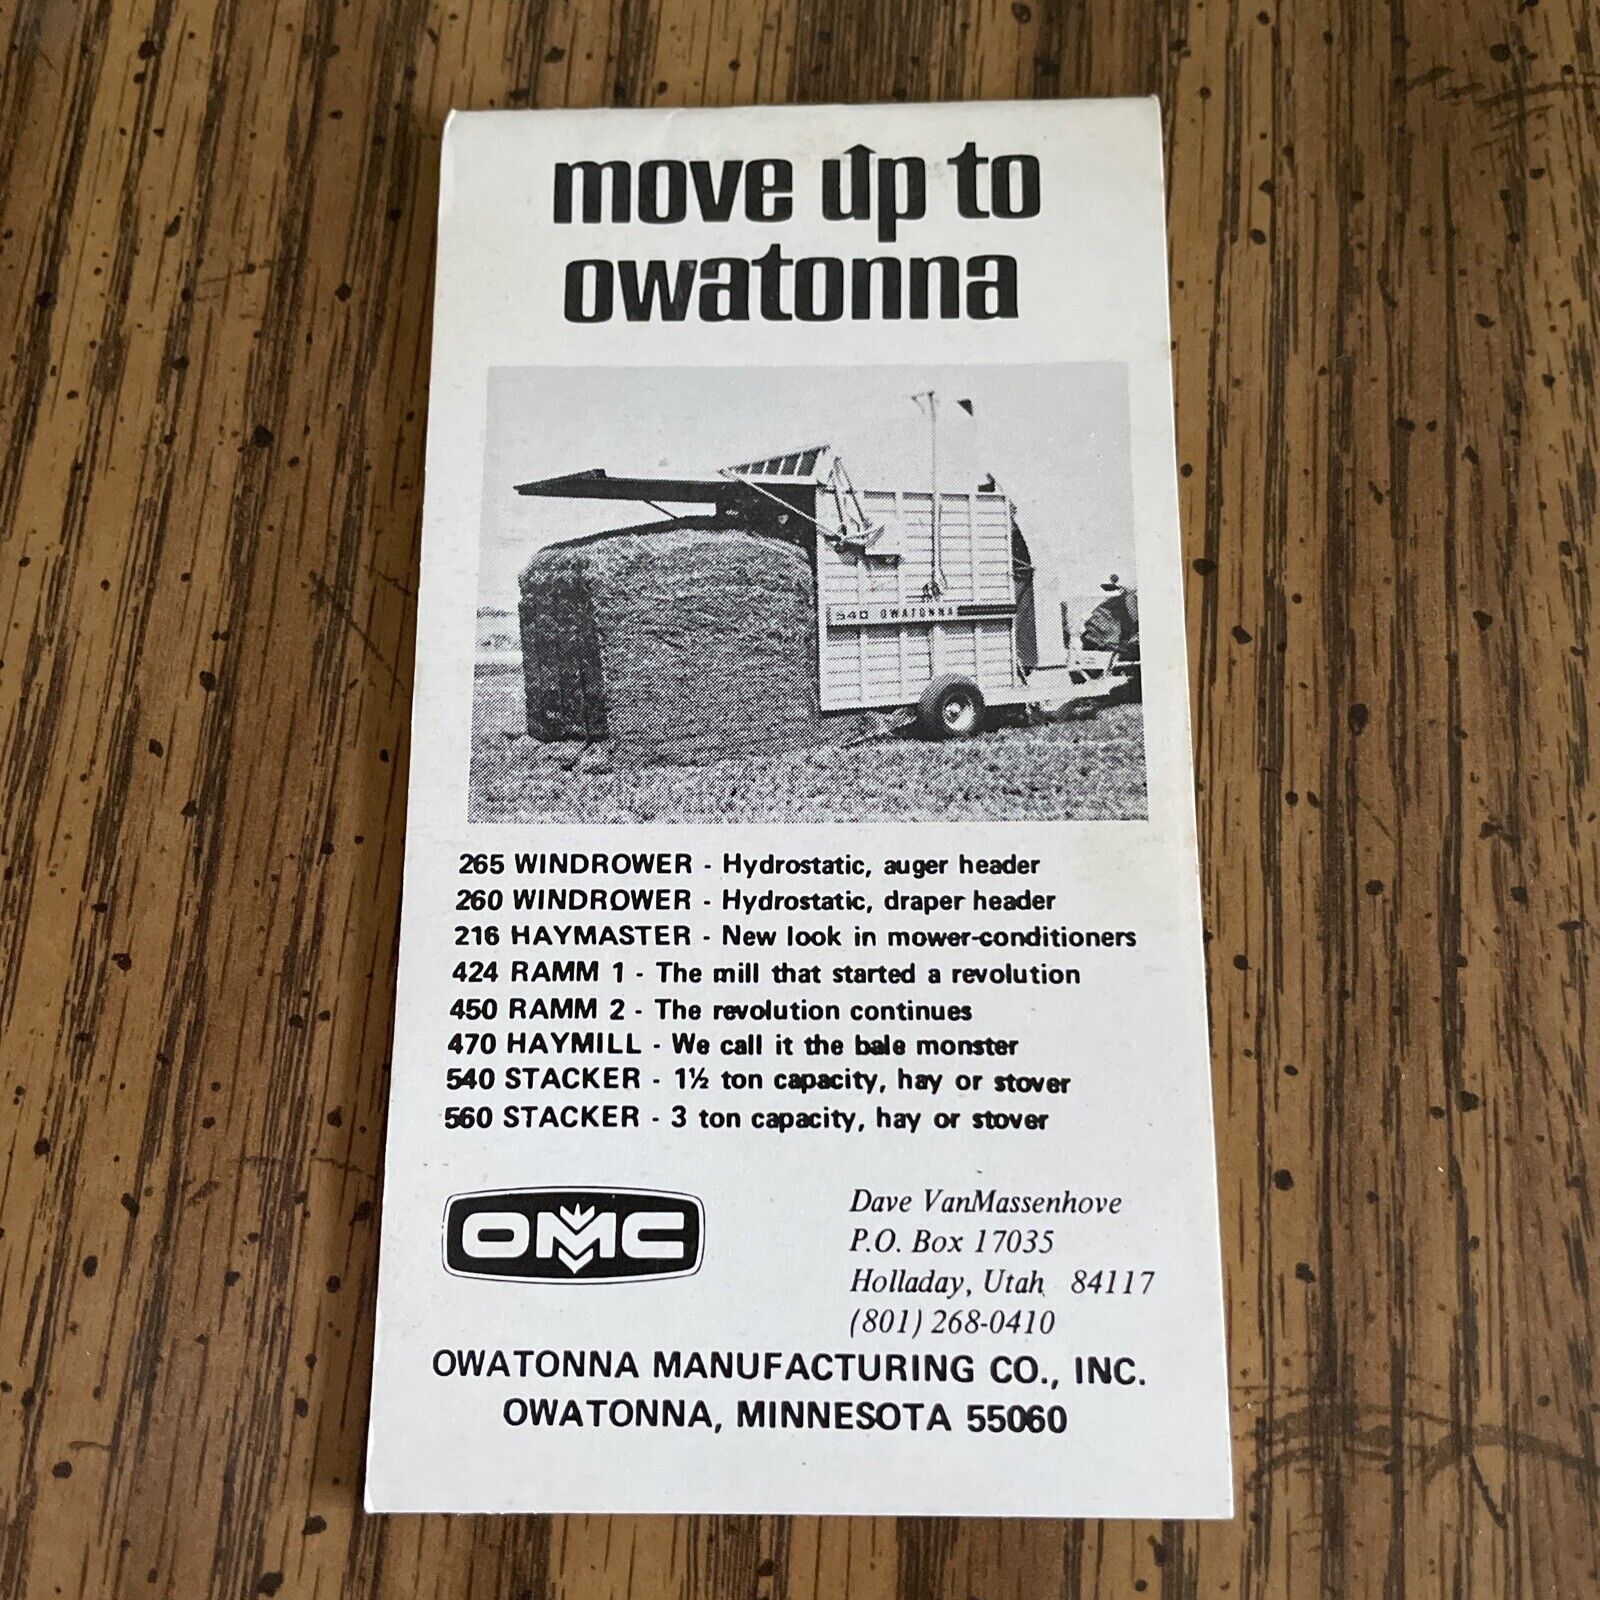 Vintage Owatonna Manufacturing Sales Notepad - Move Up To Owatonna - Minnesota